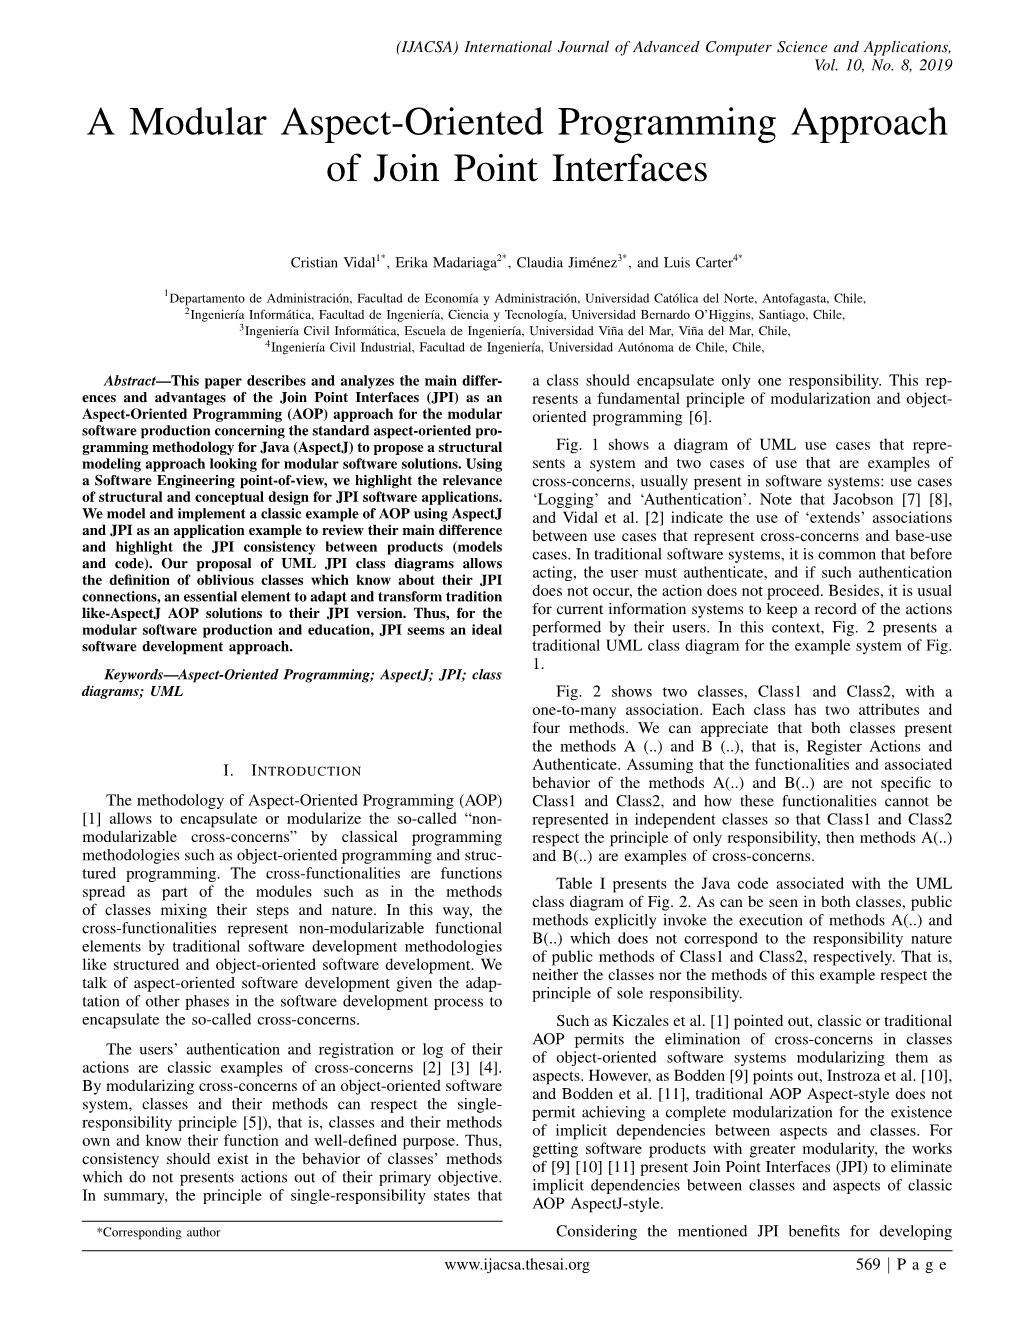 A Modular Aspect-Oriented Programming Approach of Join Point Interfaces